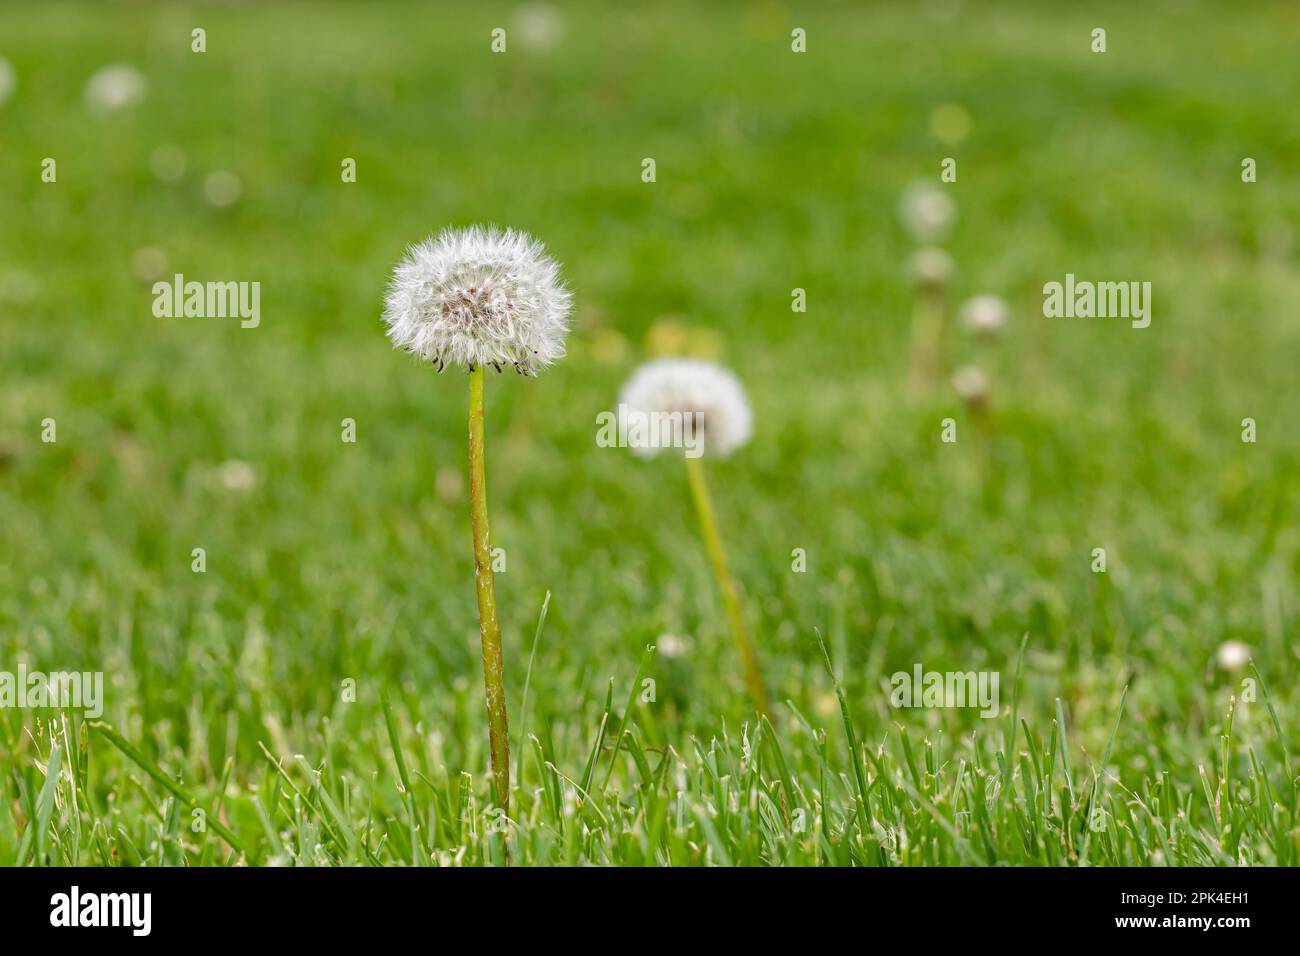 Dandelion weeds going to seed in lawn. Home lawncare, yard maintenance and weed control concept. Stock Photo